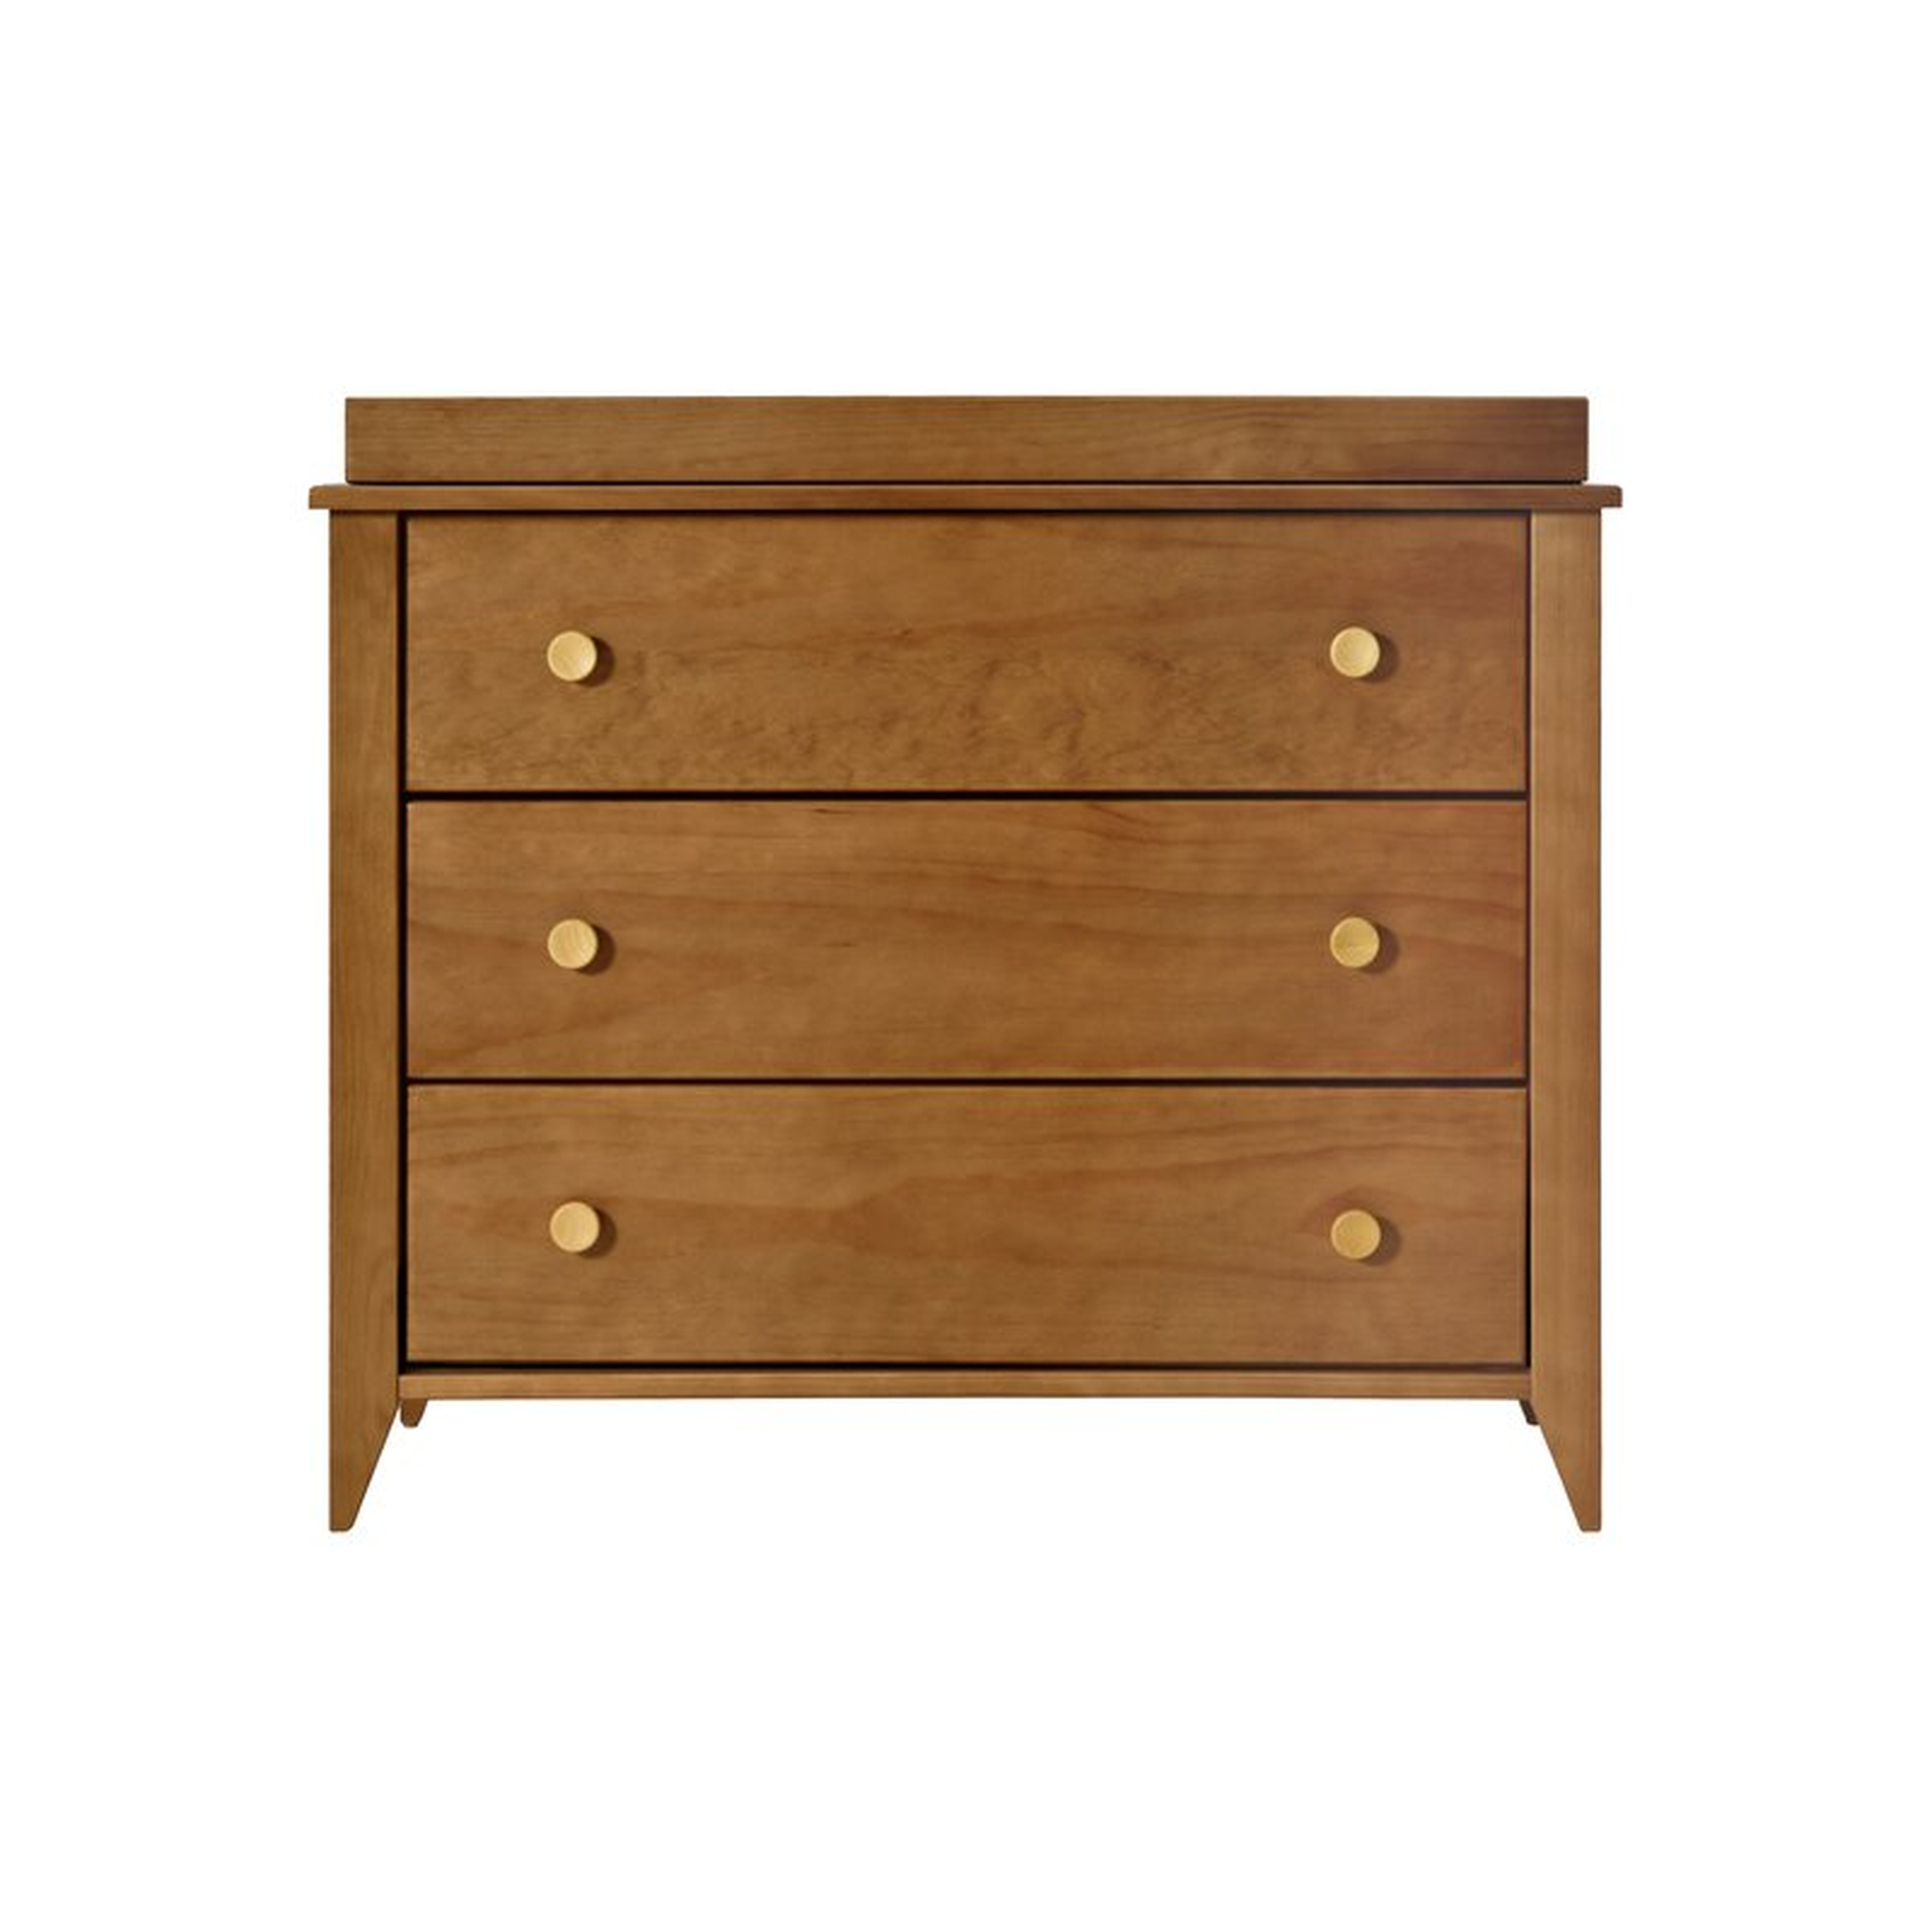 babyletto Sprout Changing Table Dresser Color: Chestnut/Natural - Perigold